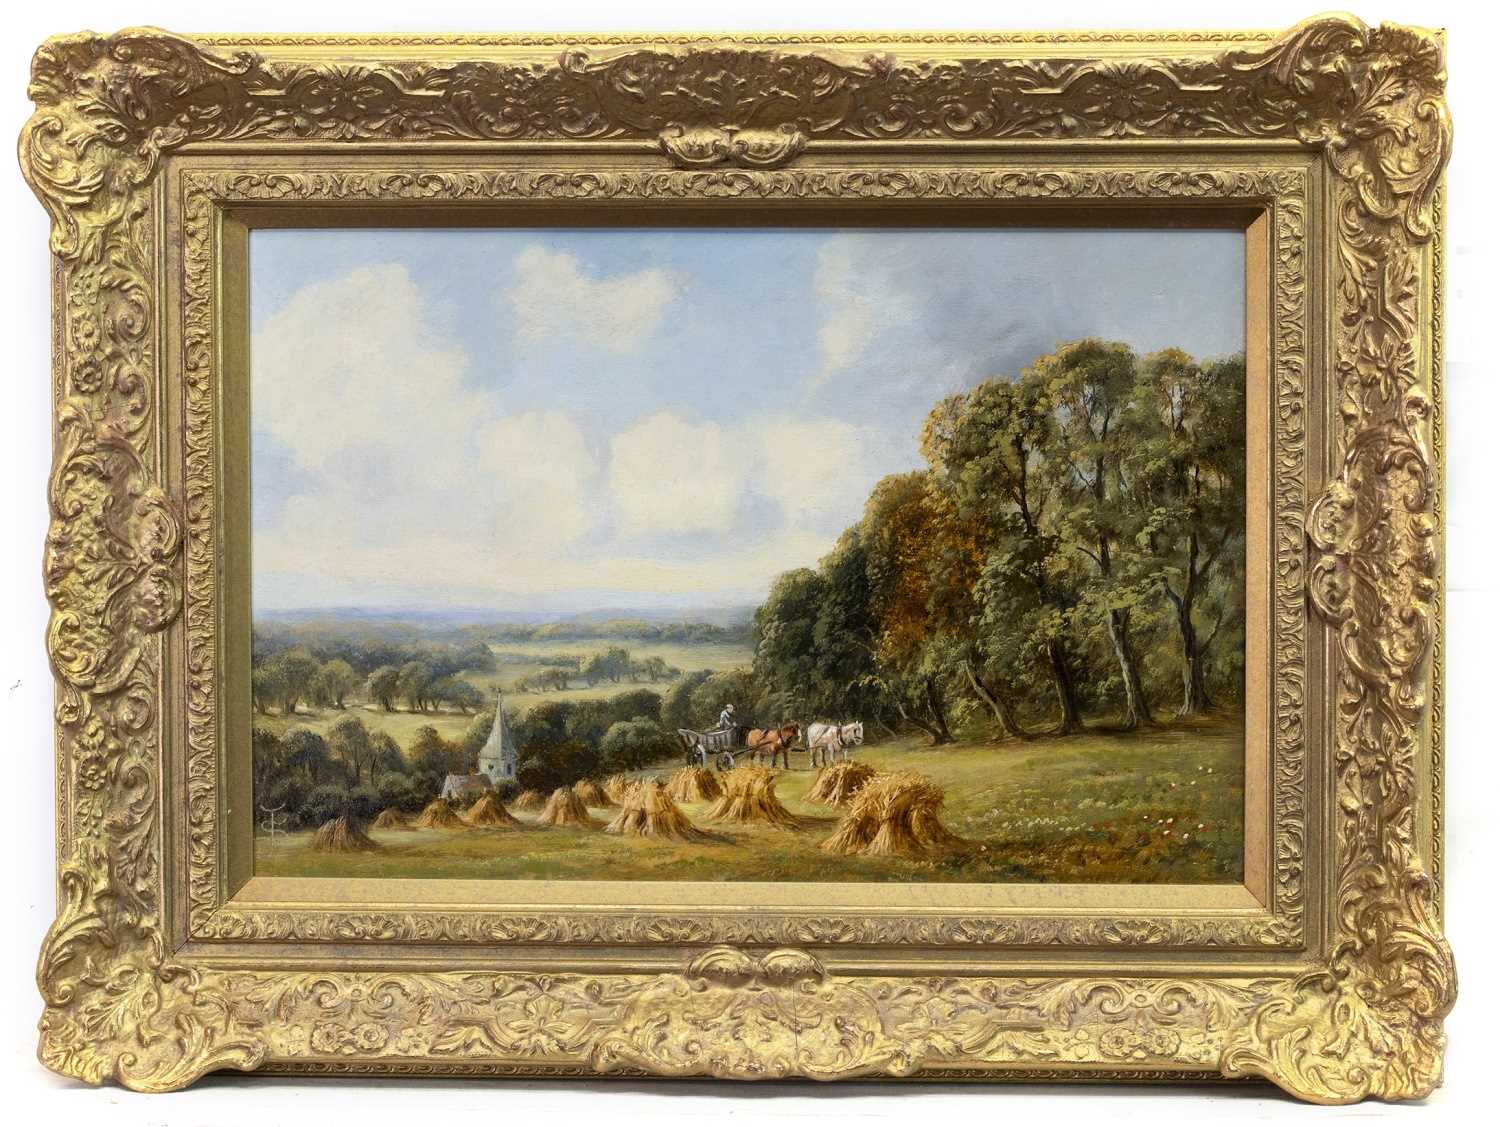 Lot 114 - HARVESTING, AN OIL BY SIDNEY YATES JOHNSON